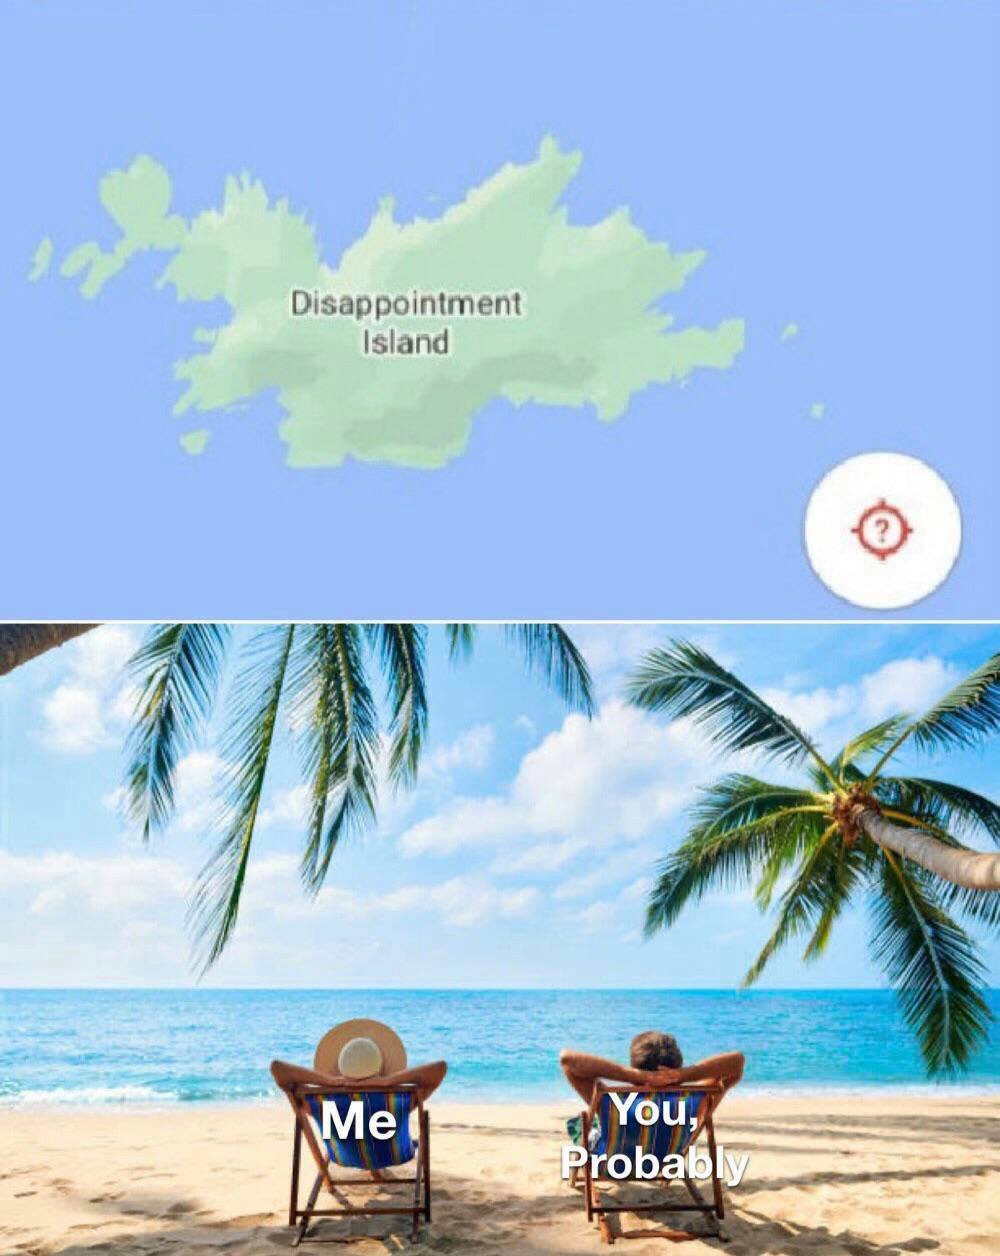 summer travel - Disappointment Island Me You, Probably